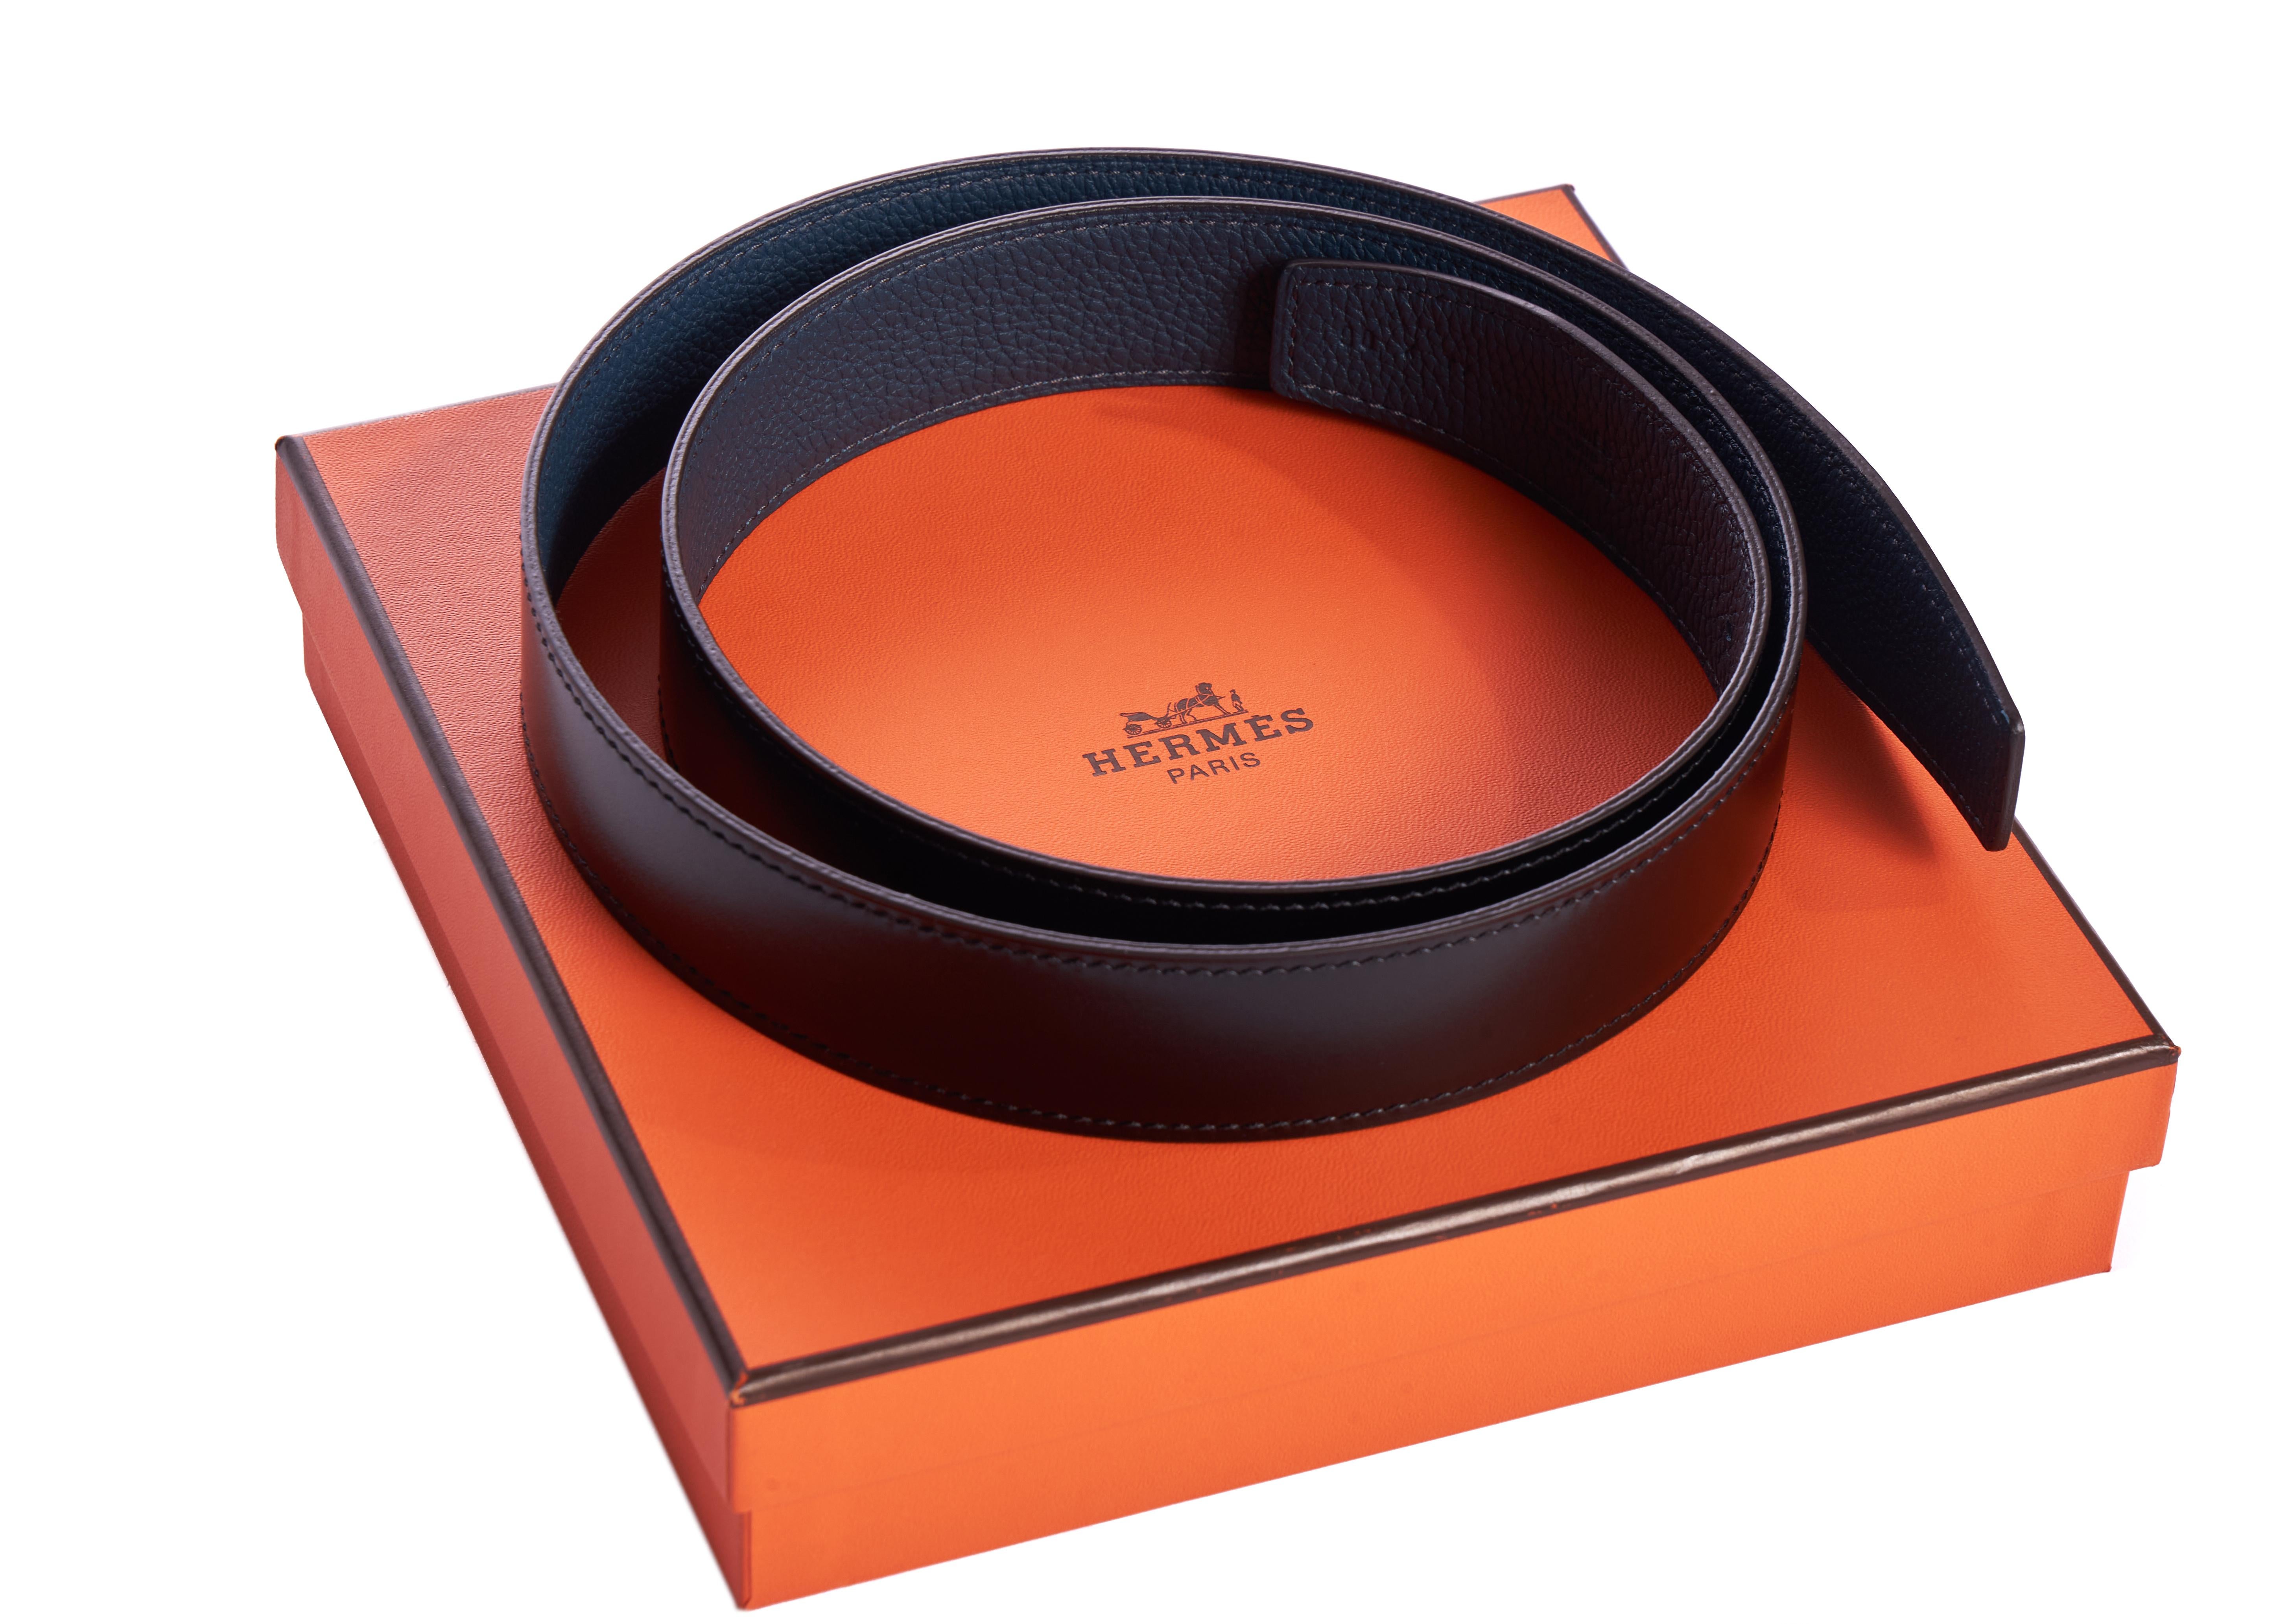 Hermès brand new limited edition reversible leather strap for medium 32mm H belt. Black box calf and blue togo leather. 90cm. Comes with original box.